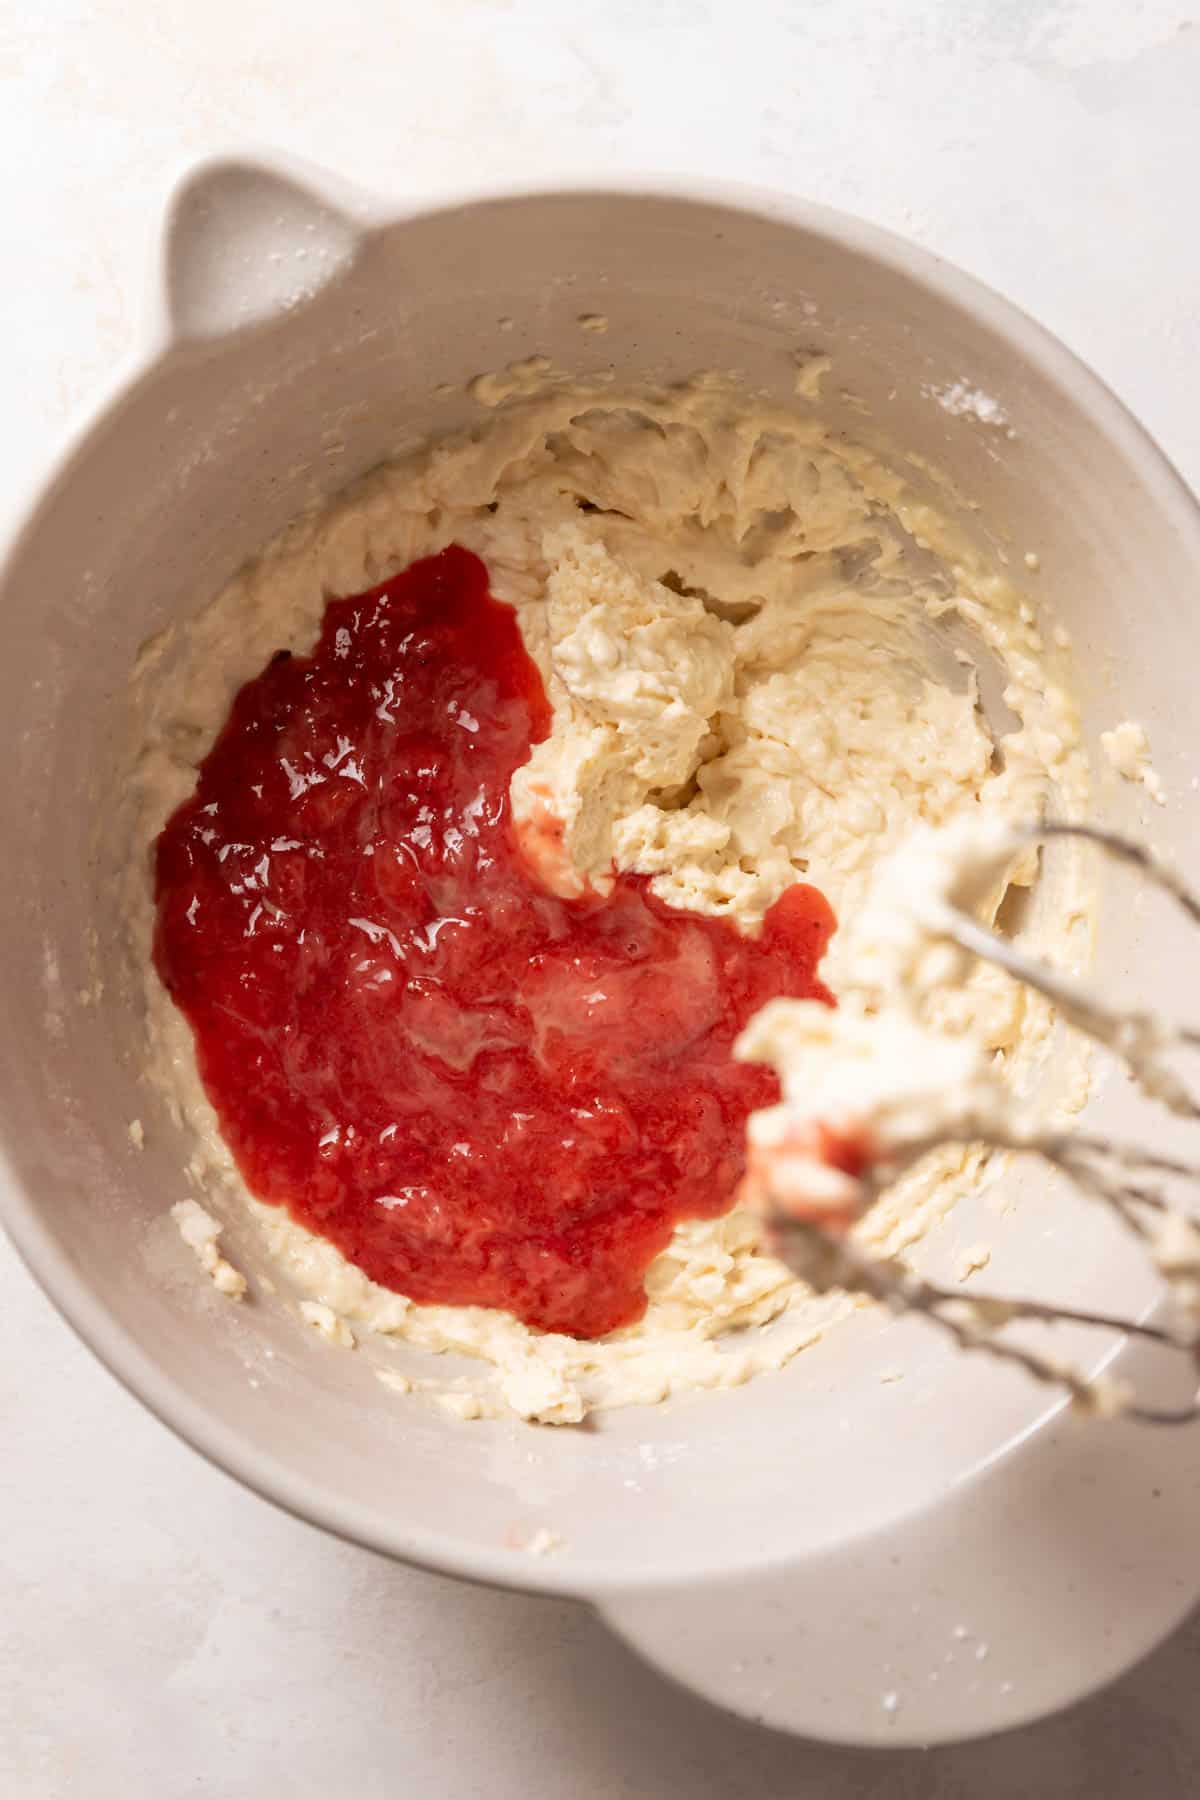 strawberry puree on top of the cake batter before mixing it in.